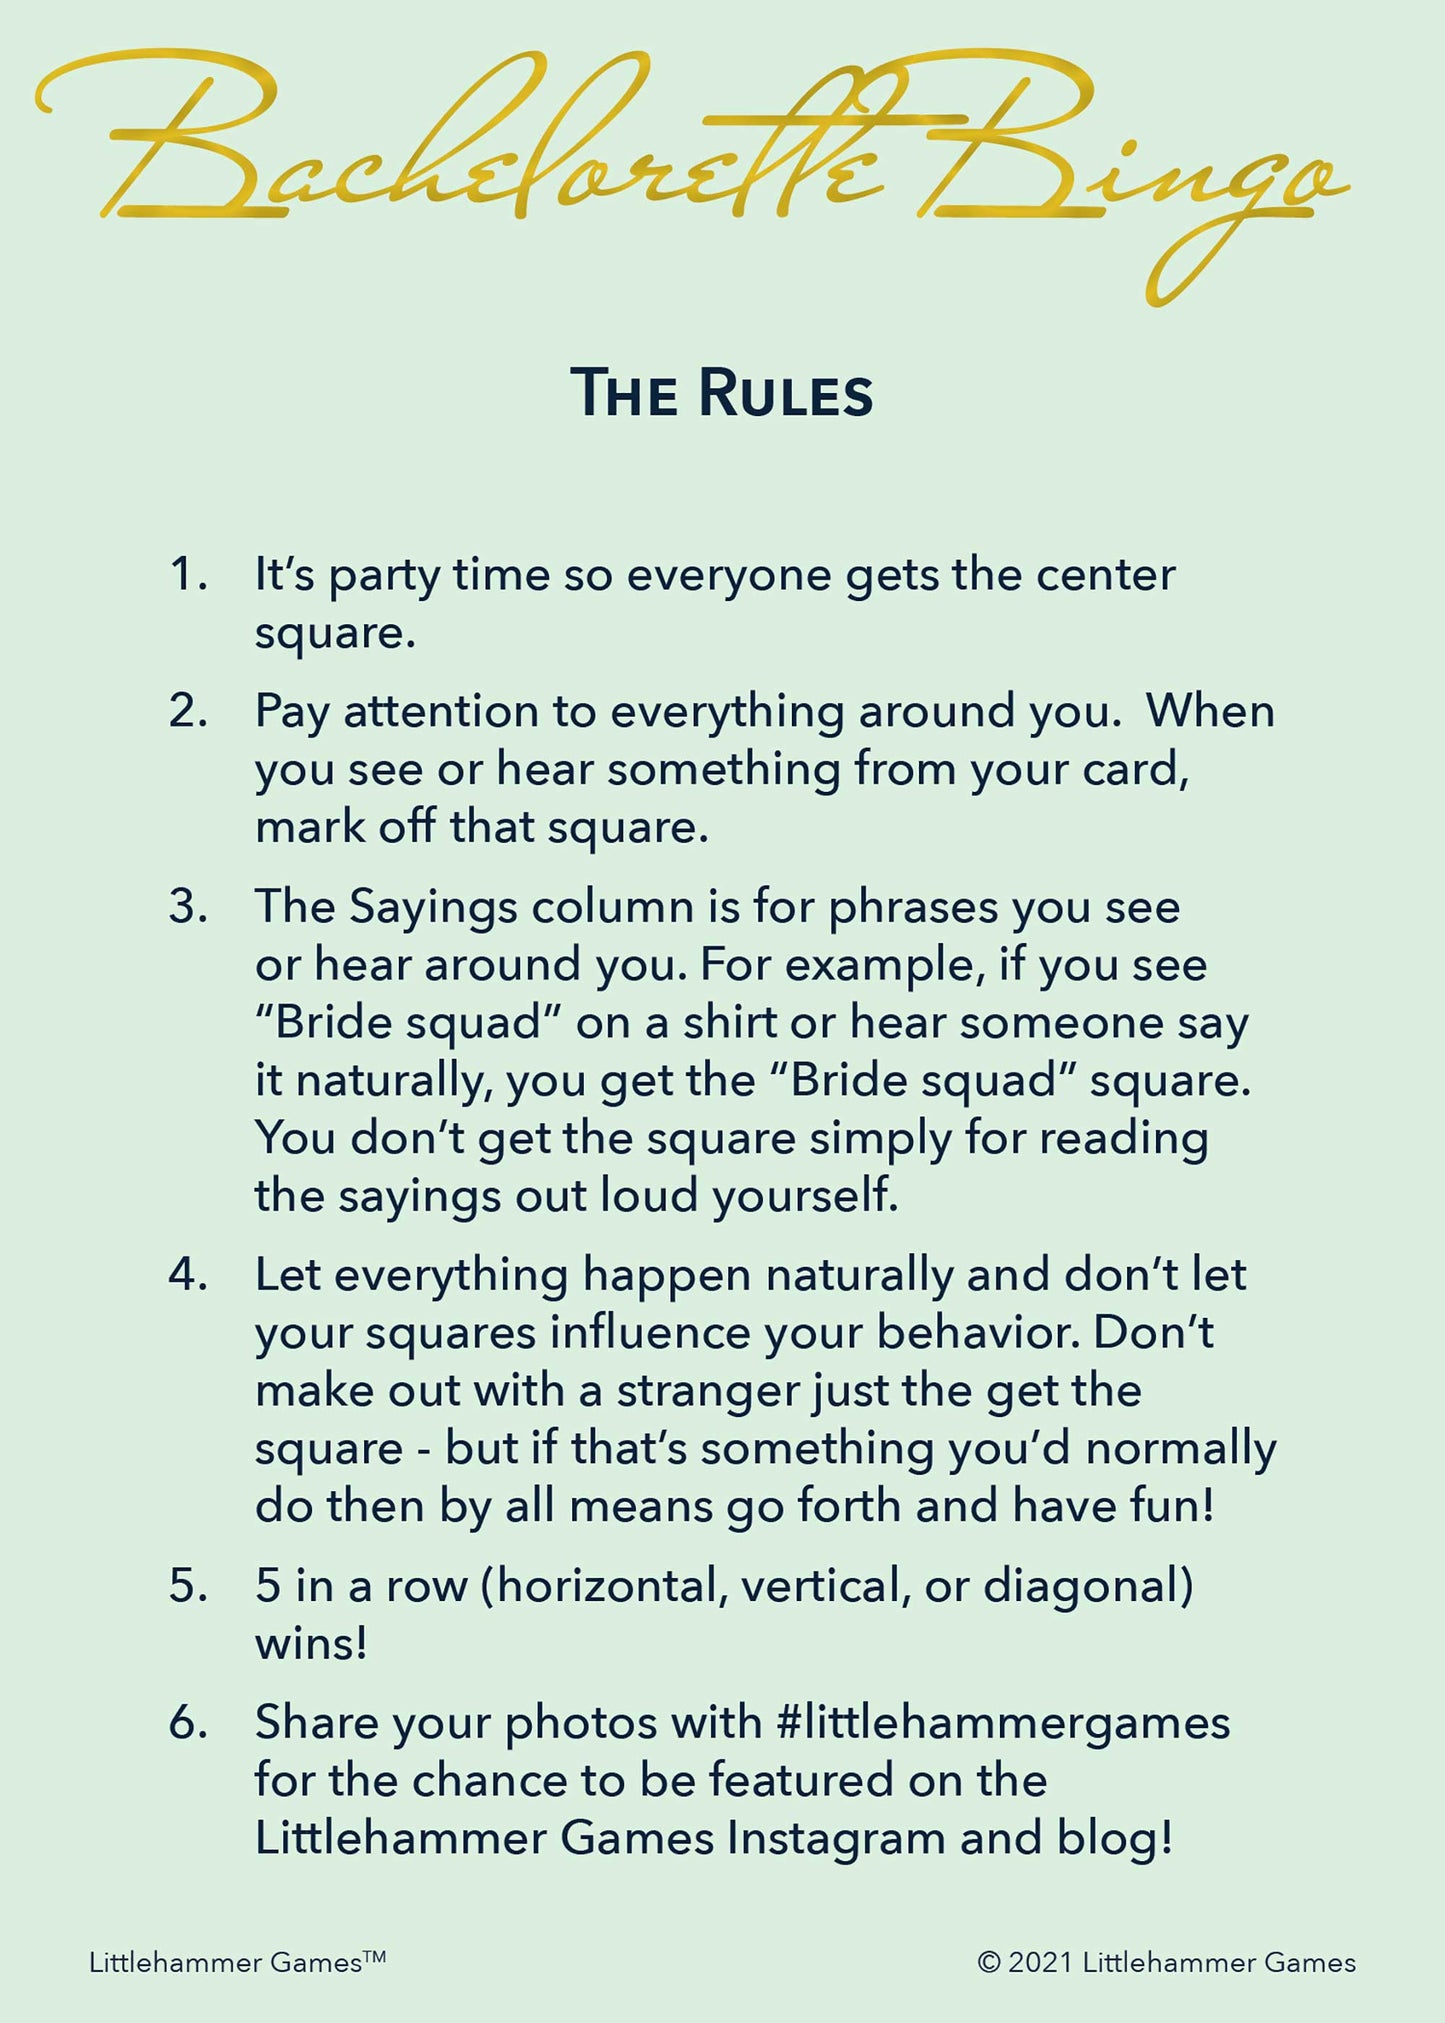 Bachelorette Bingo rules card with gold text on a mint background